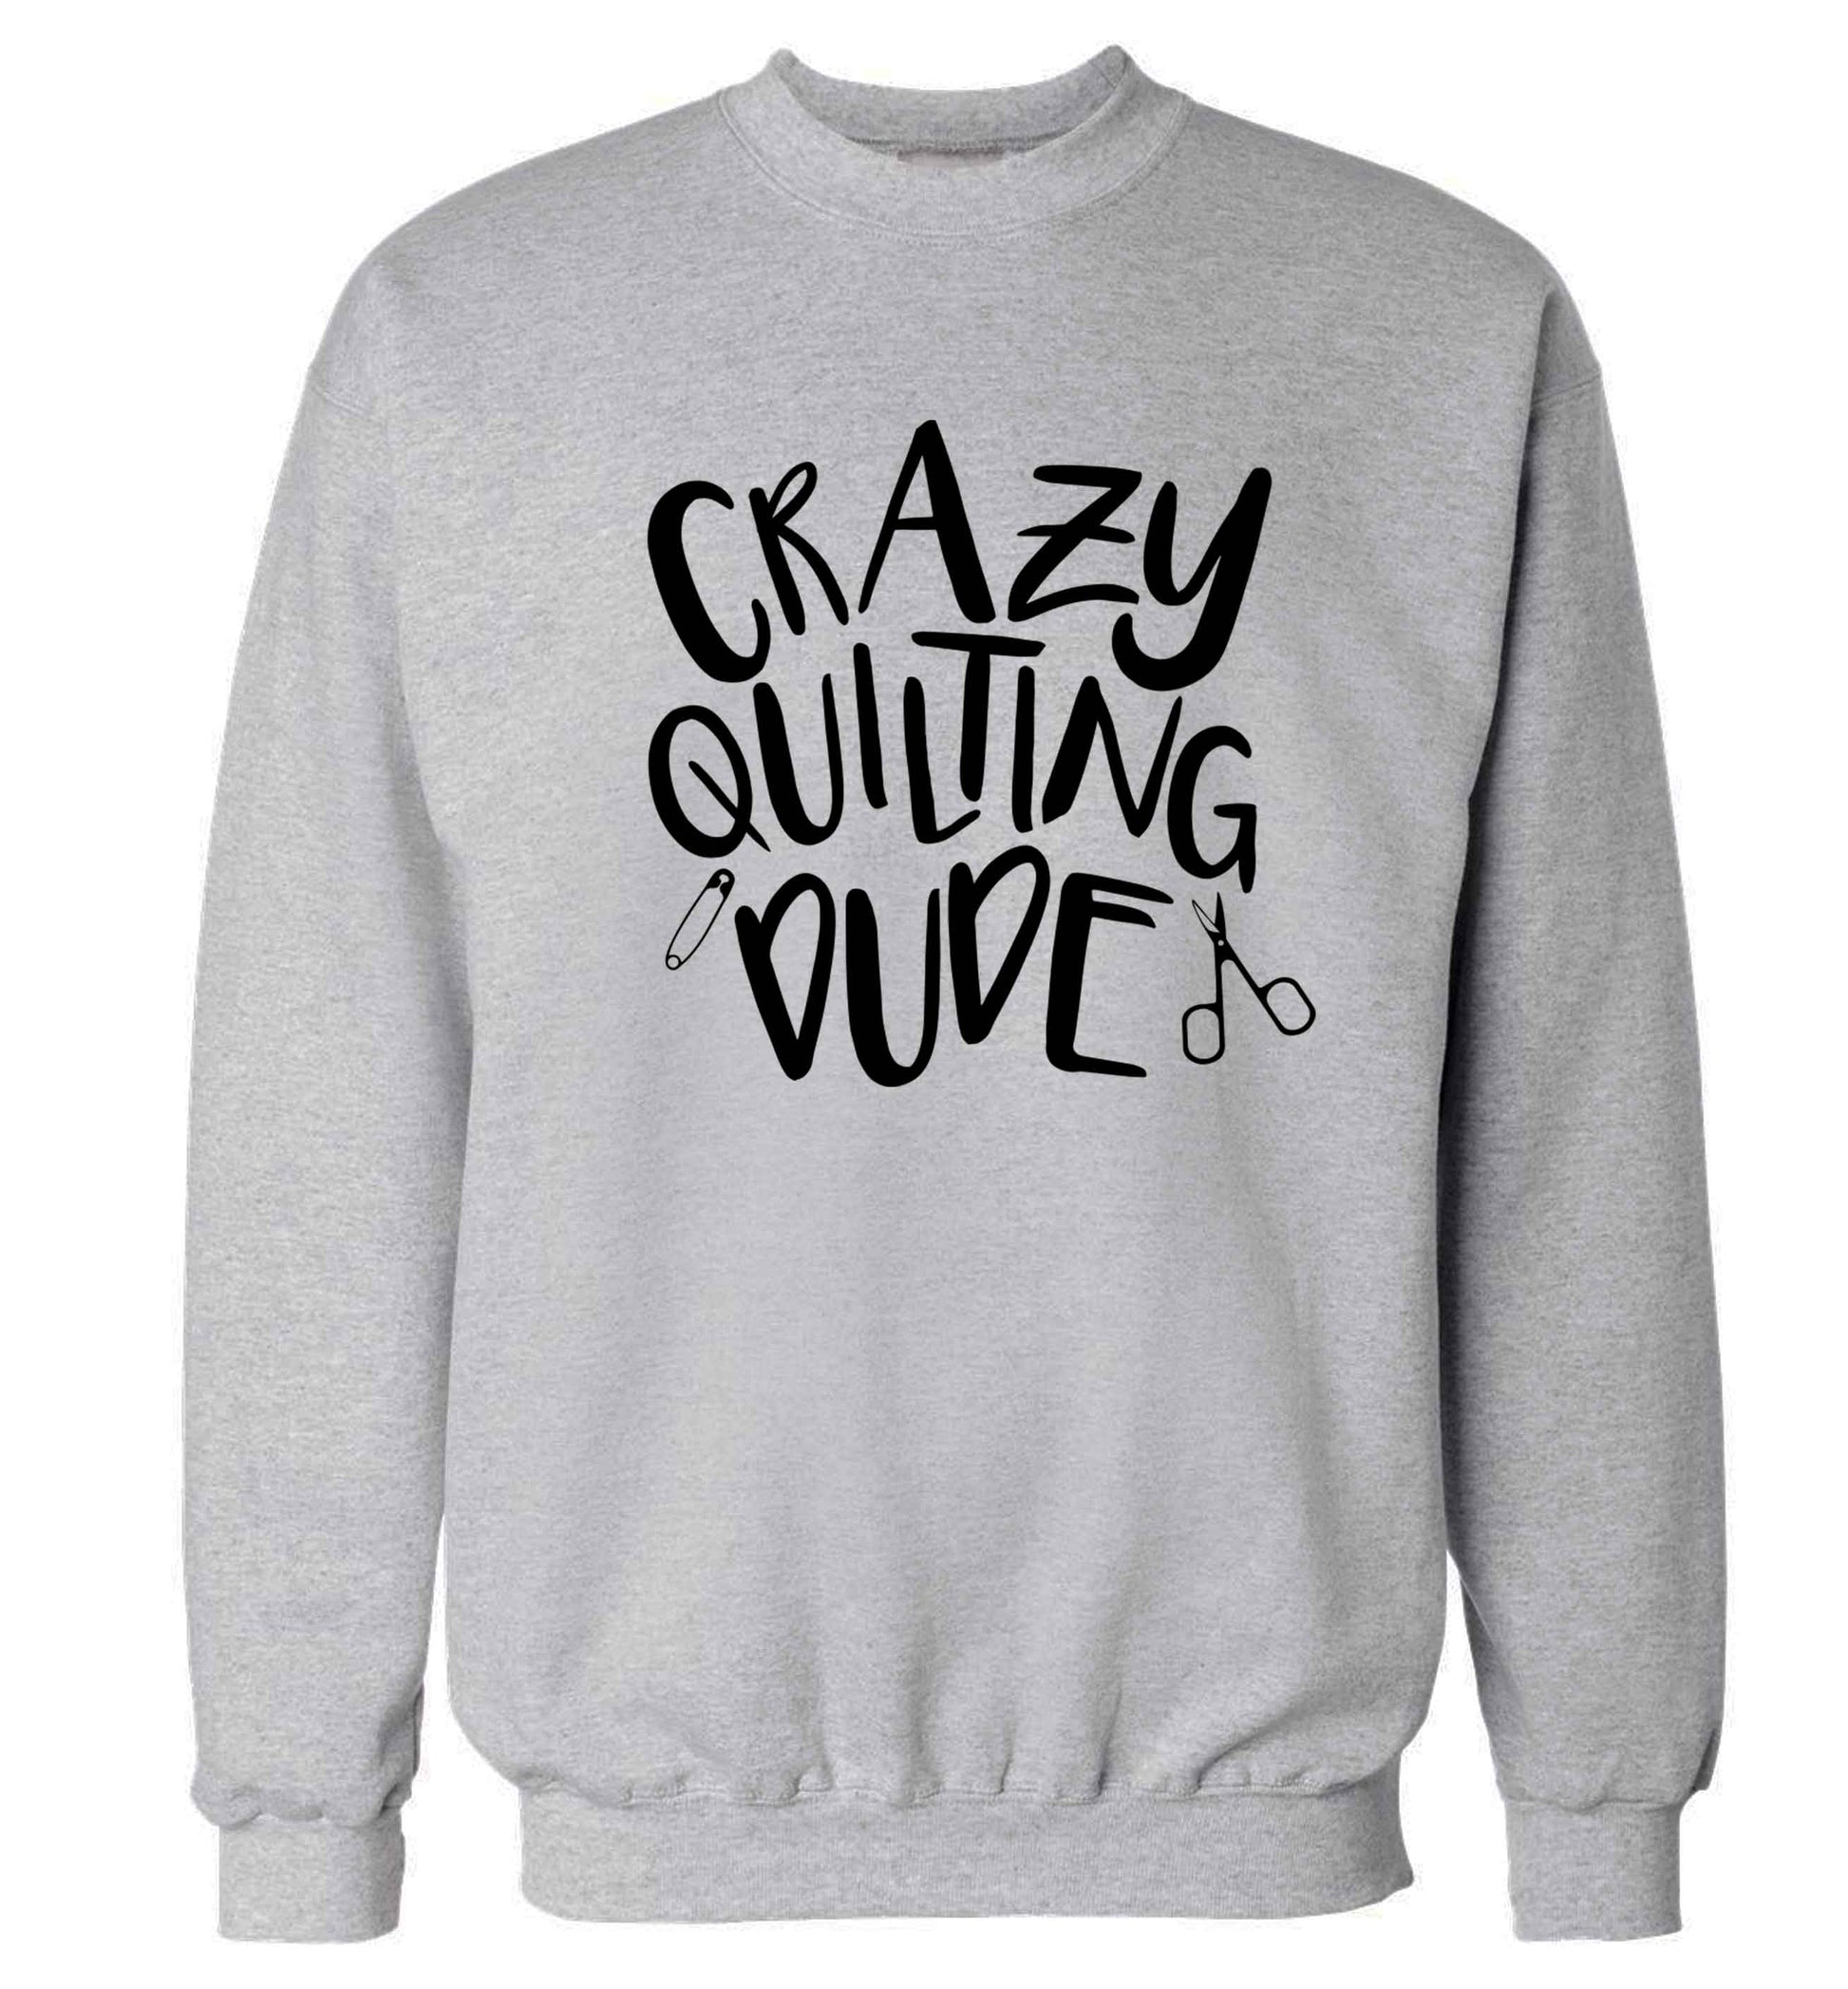 Crazy quilting dude Adult's unisex grey Sweater 2XL